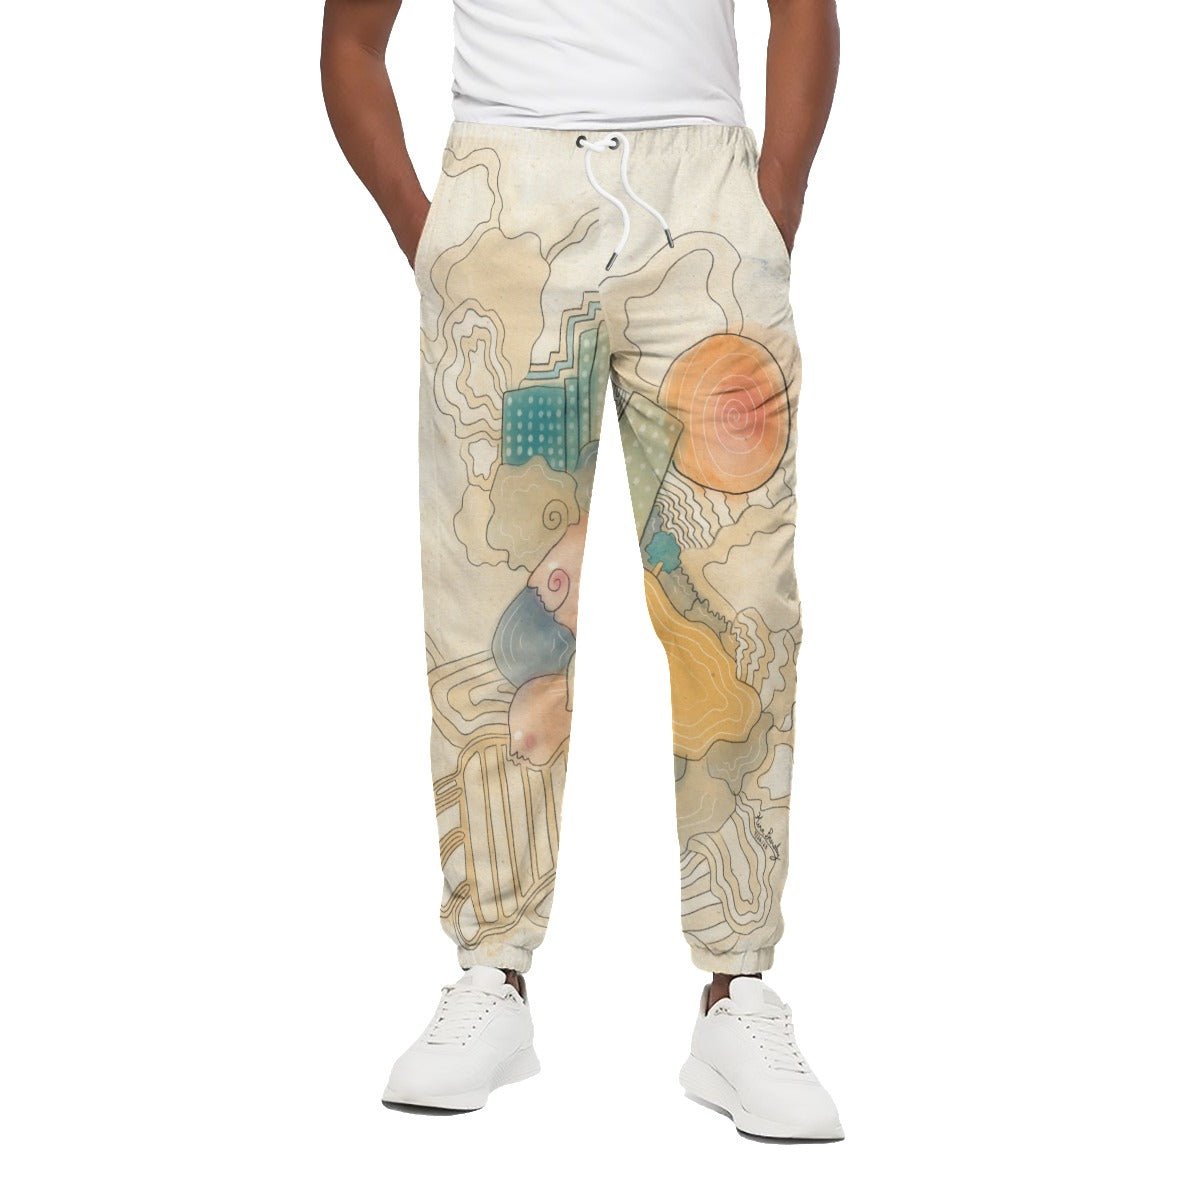 "As Above, So Below" - Unisex Sweatpants | Pants | All Around Artsy Fashion